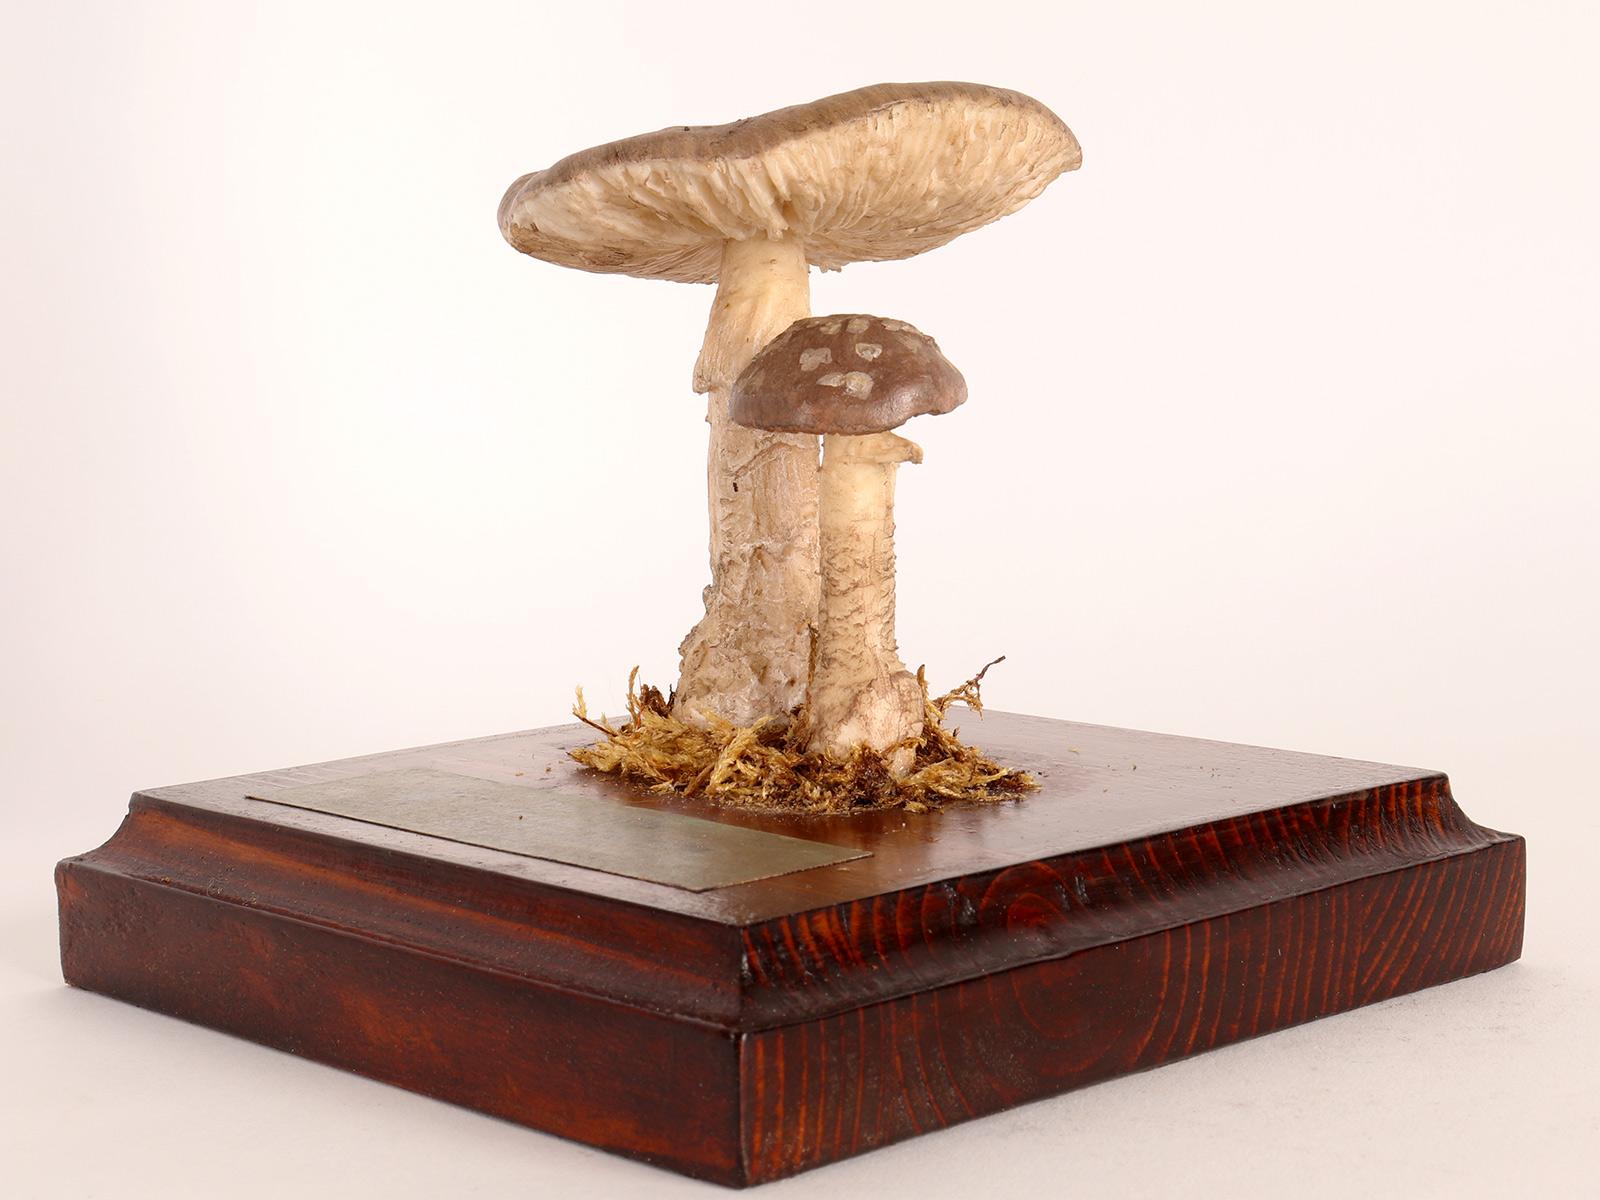 A pharmacy model of specimen Pantherpilz, (Amanita Pantherina), made of scagliola painted in watercolor on a wooden base of a square shape of light color with moss and hay. It shows a light green paper label on the base, with the specifics of the